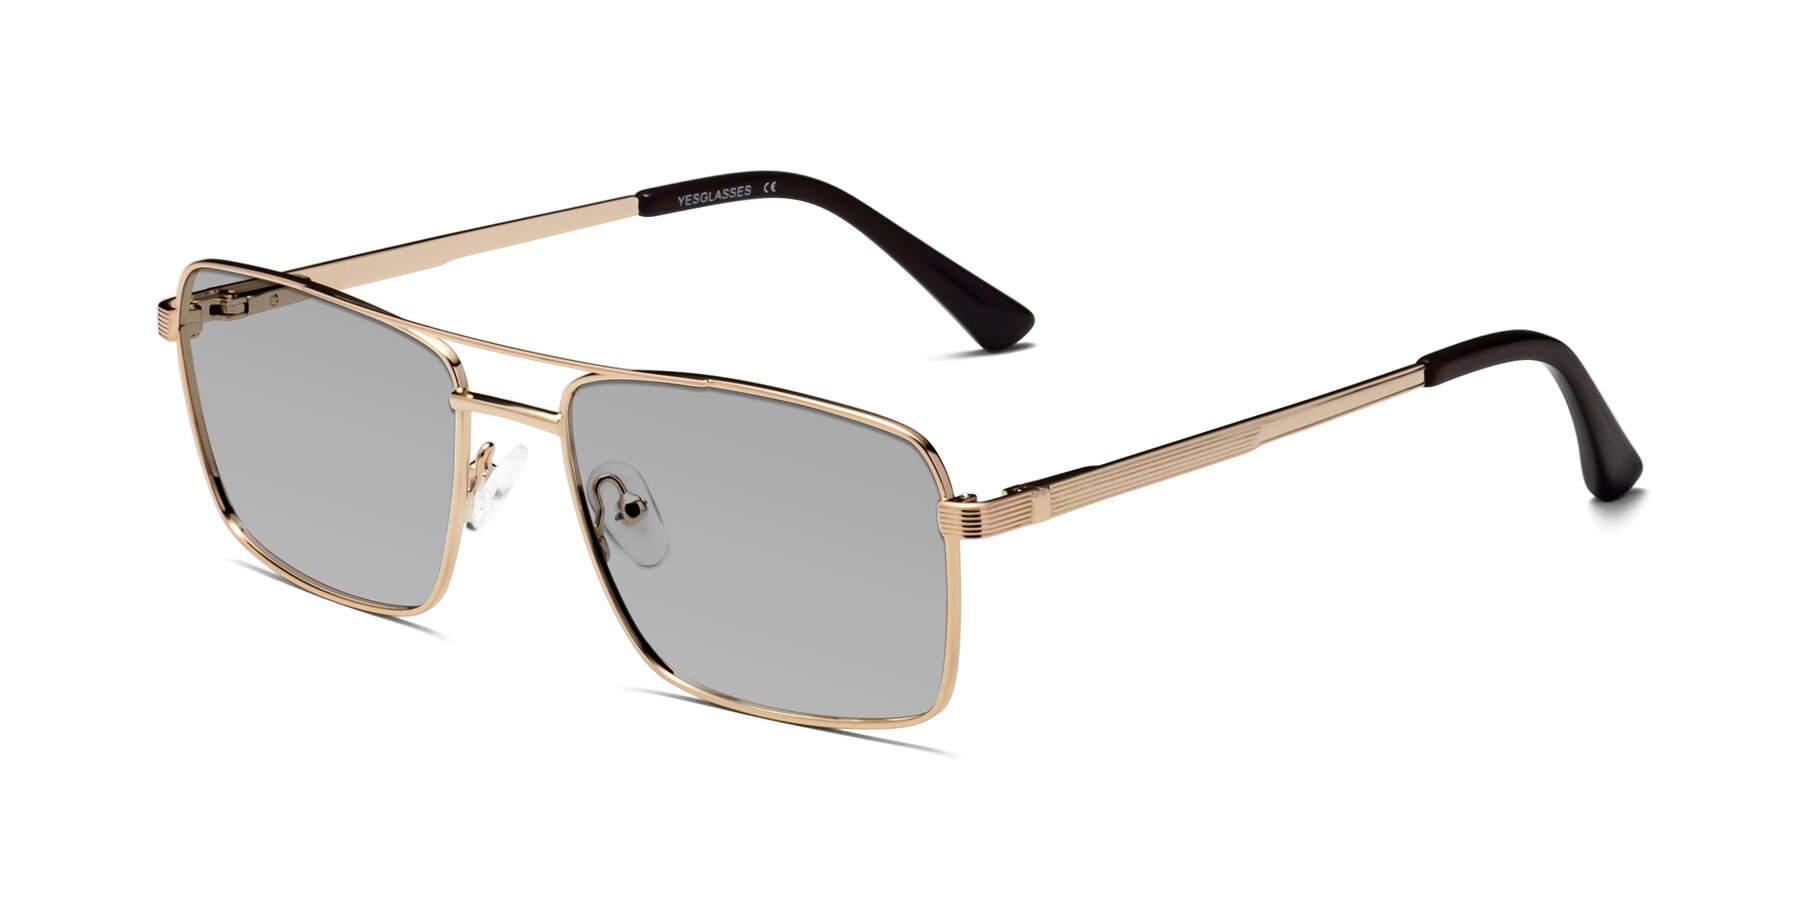 Angle of Beckum in Gold with Light Gray Tinted Lenses